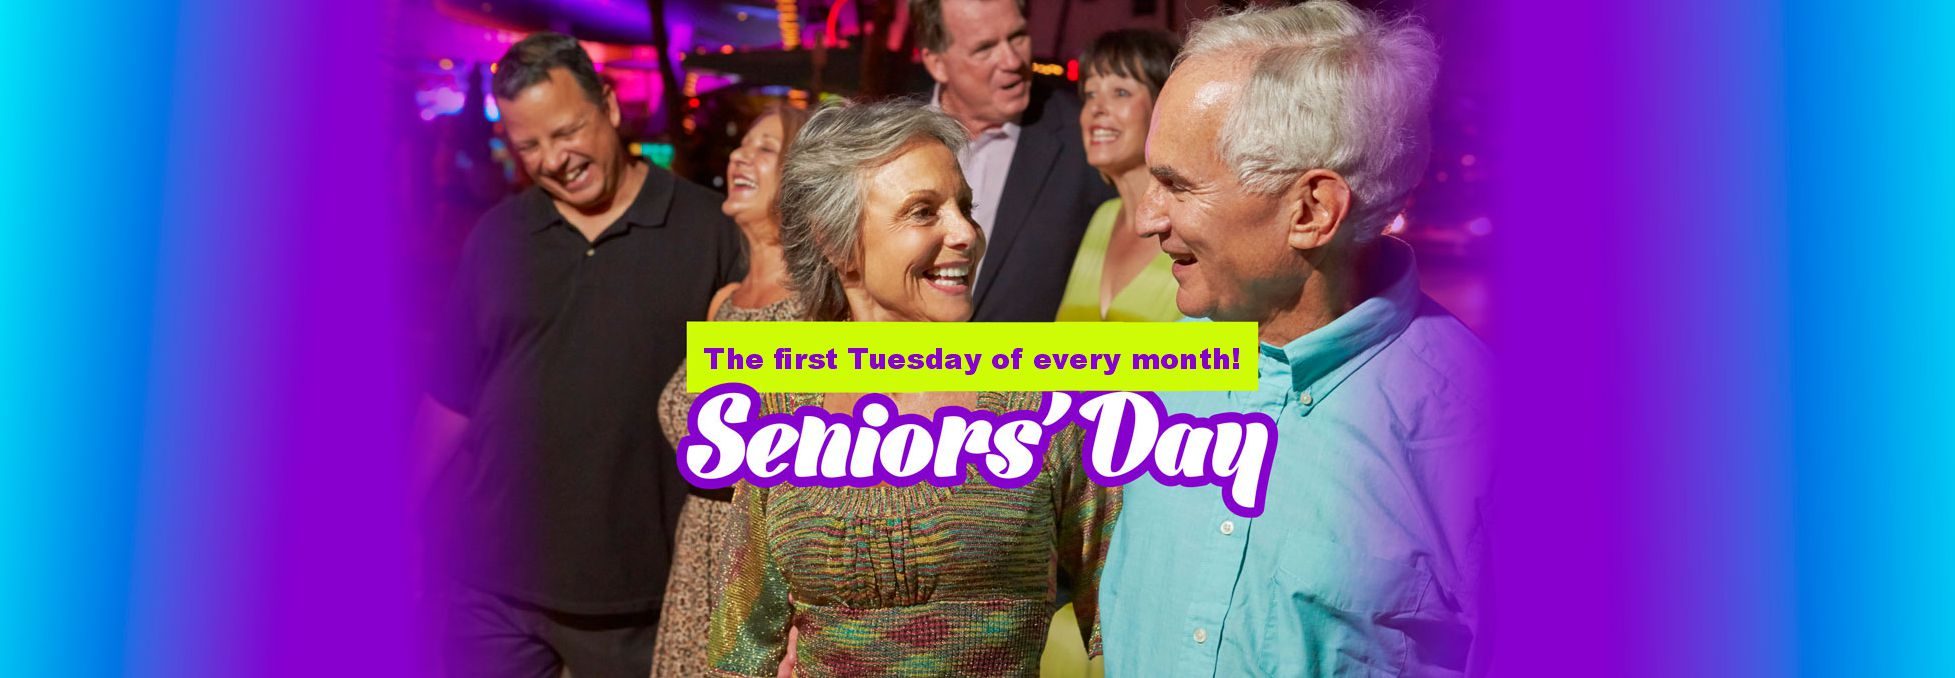 Senior's Day - the first Tuesday of every month, 55+ members receive $10 in free play